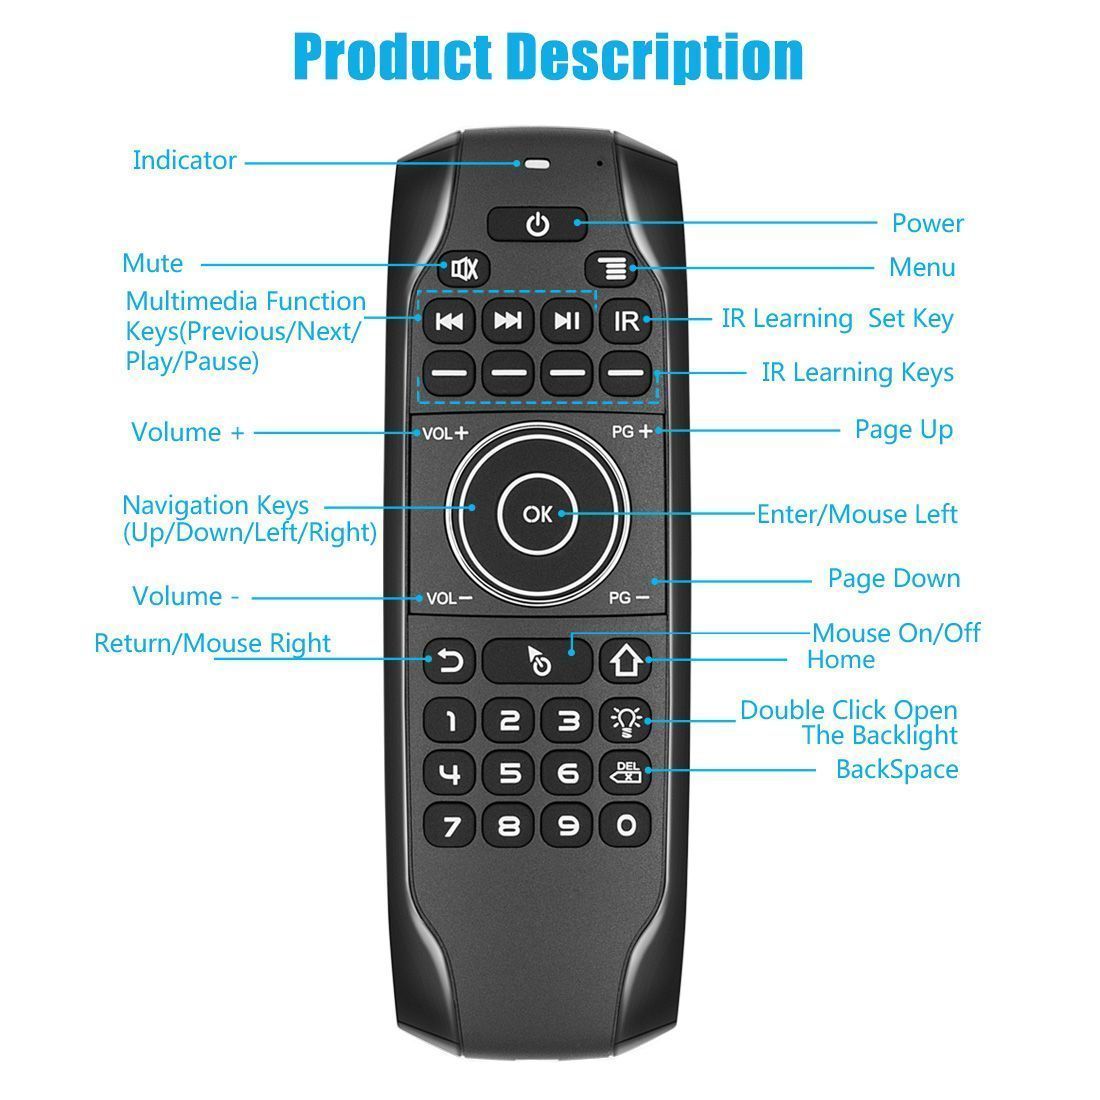 G7BTS-24GHz-Air-Mouse-6-Axis-with-Mini-Keyboard-BT50-Multi-Laser-Fine-Backlit-IR-Learning-Montion-Ga-1764877